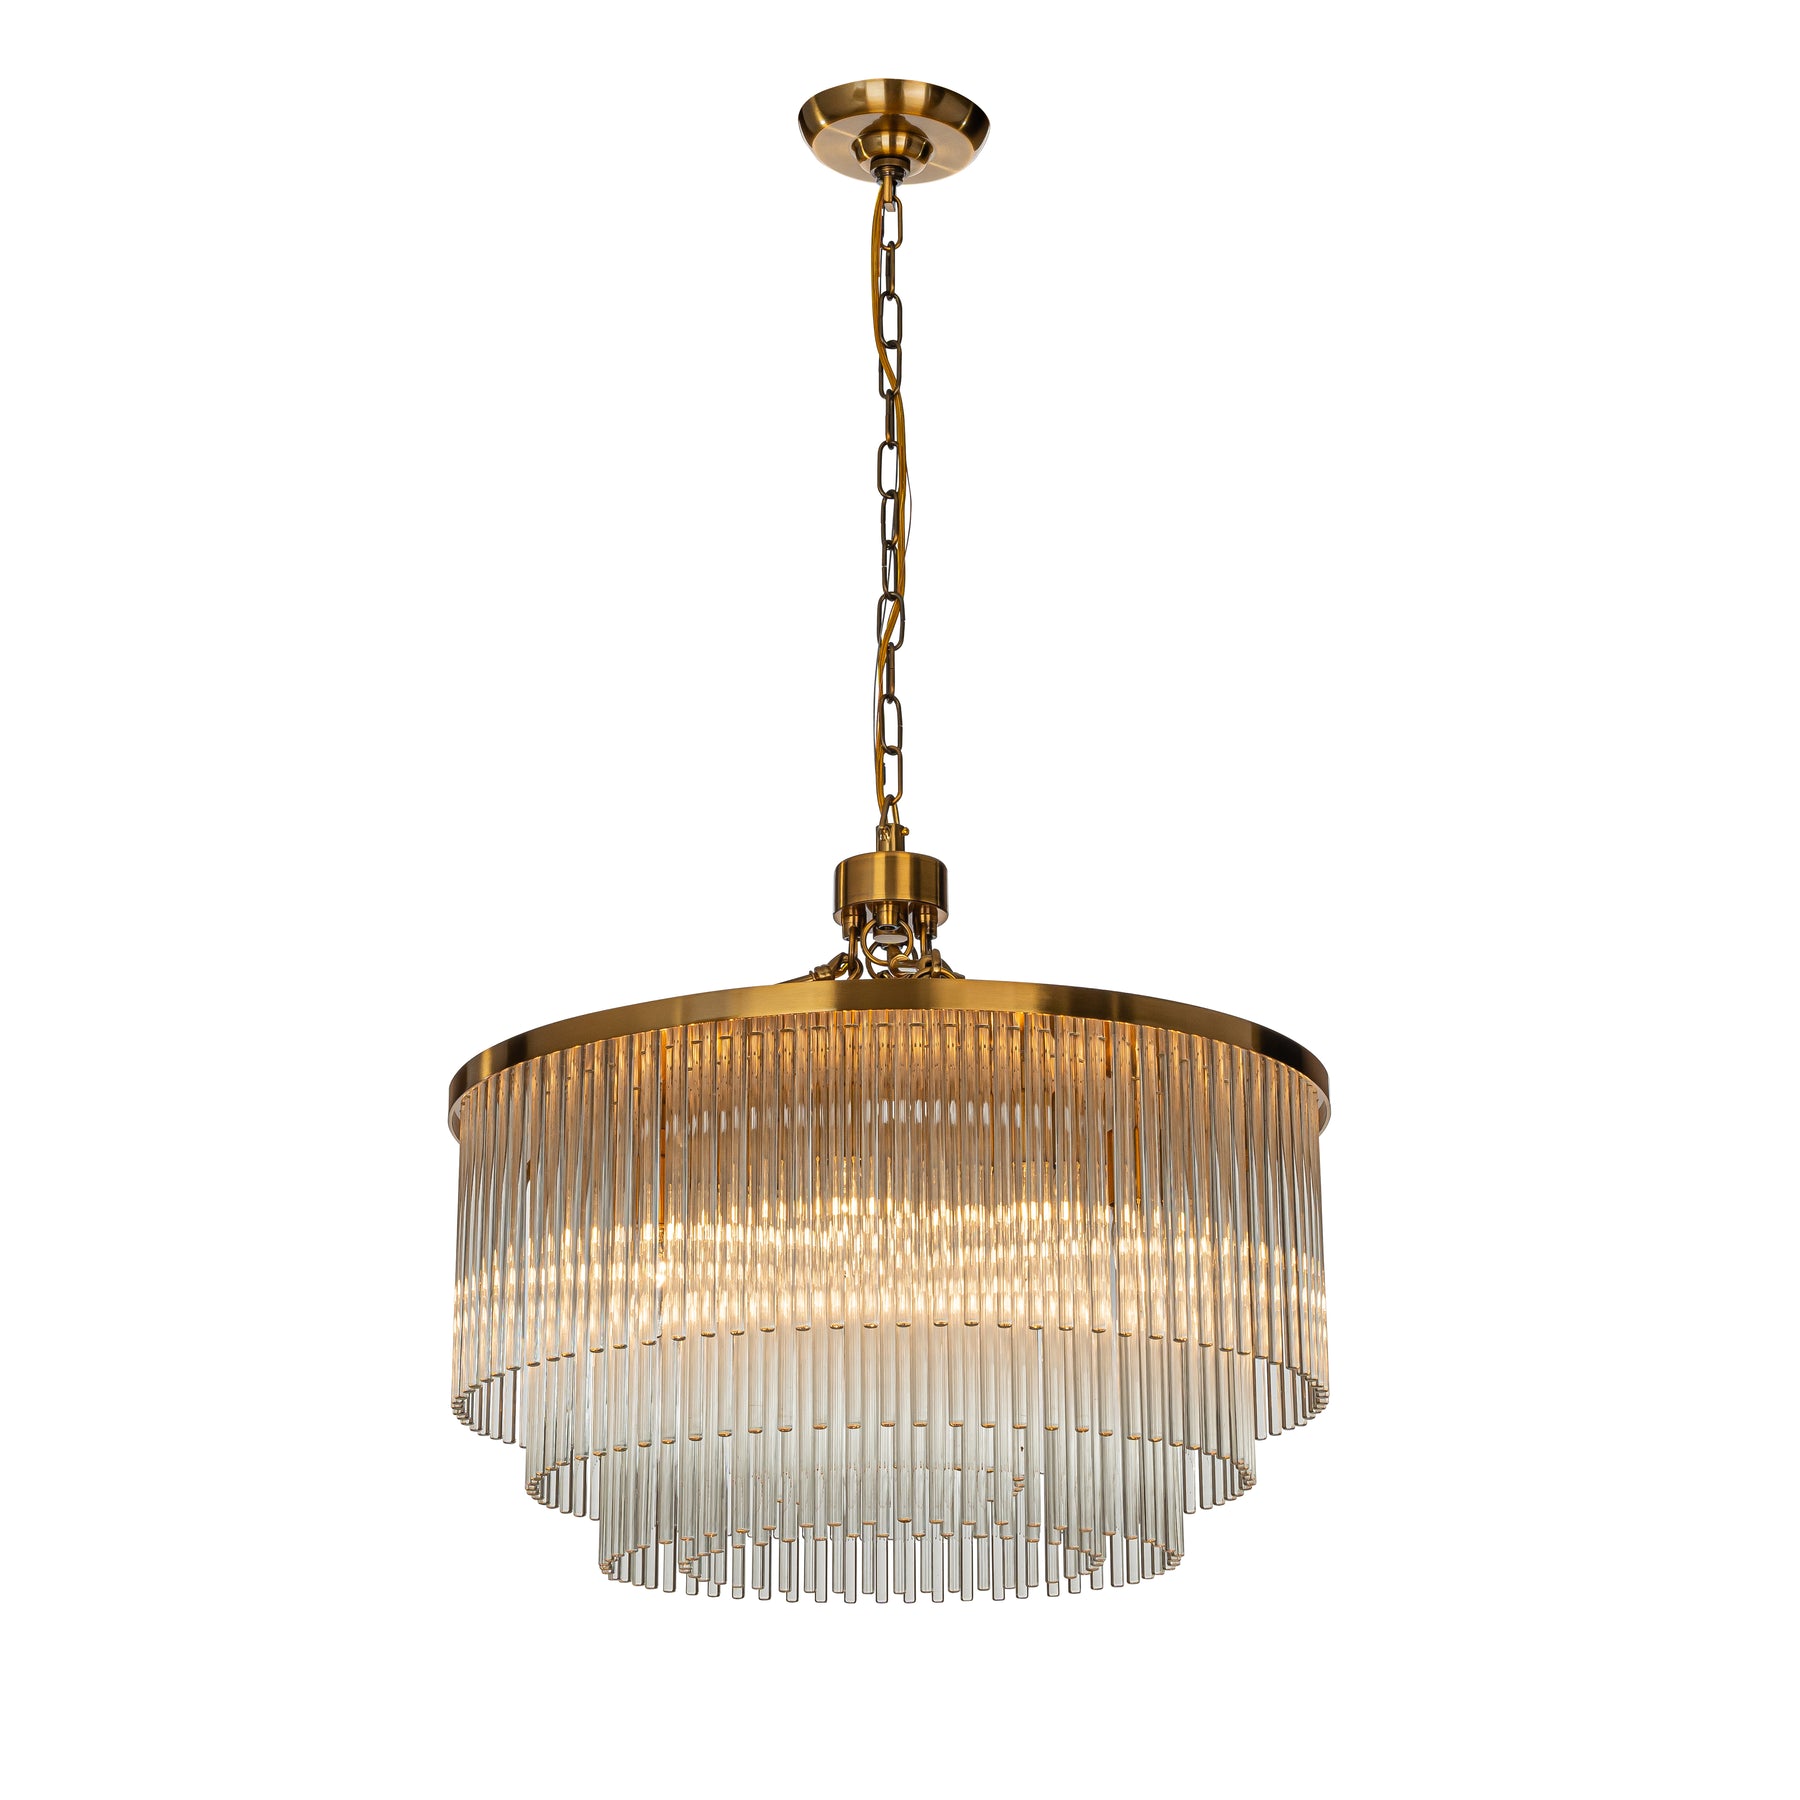 Mid-century Modern 8-Lights 3-Tier Glam Antique Brass Round Glass Fringe Chandelier With Clear Glass Rods